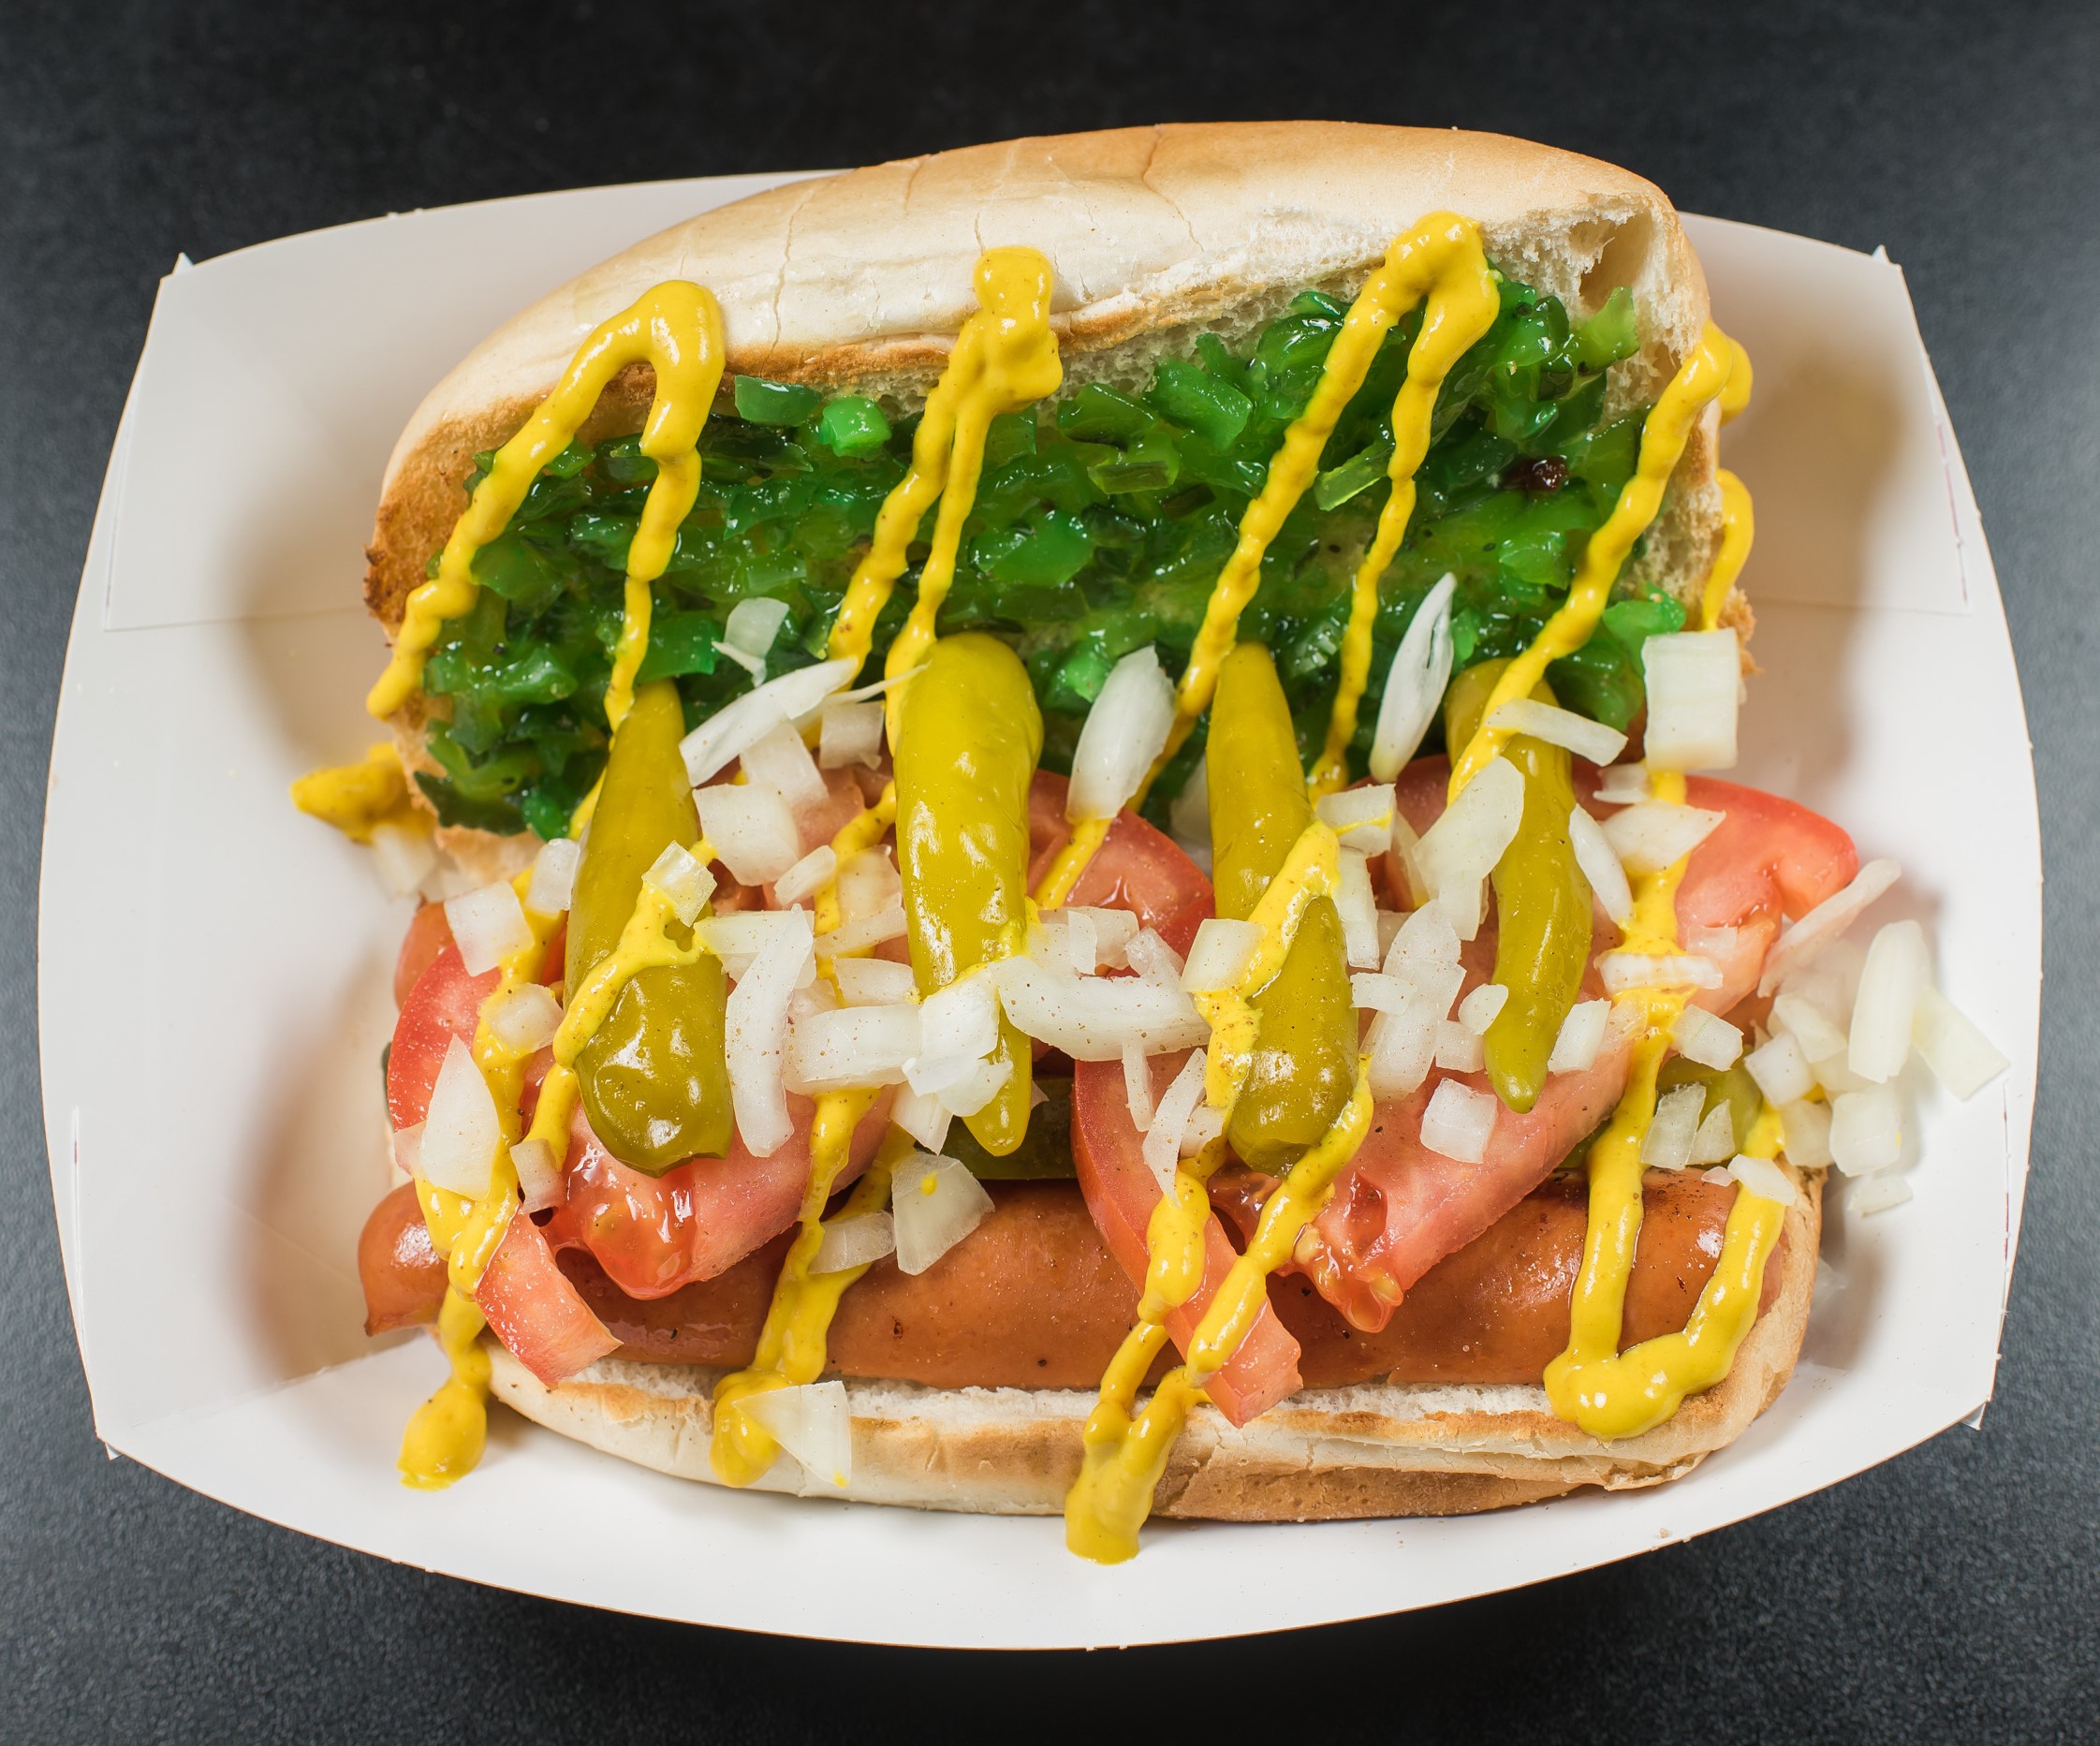 Pictured here:  Chicago Dog featuring Relish, Onions, Dill Pickle, Tomato, Sport Peppers, Mustard and Celery Salt. Vegetarian Option Available.